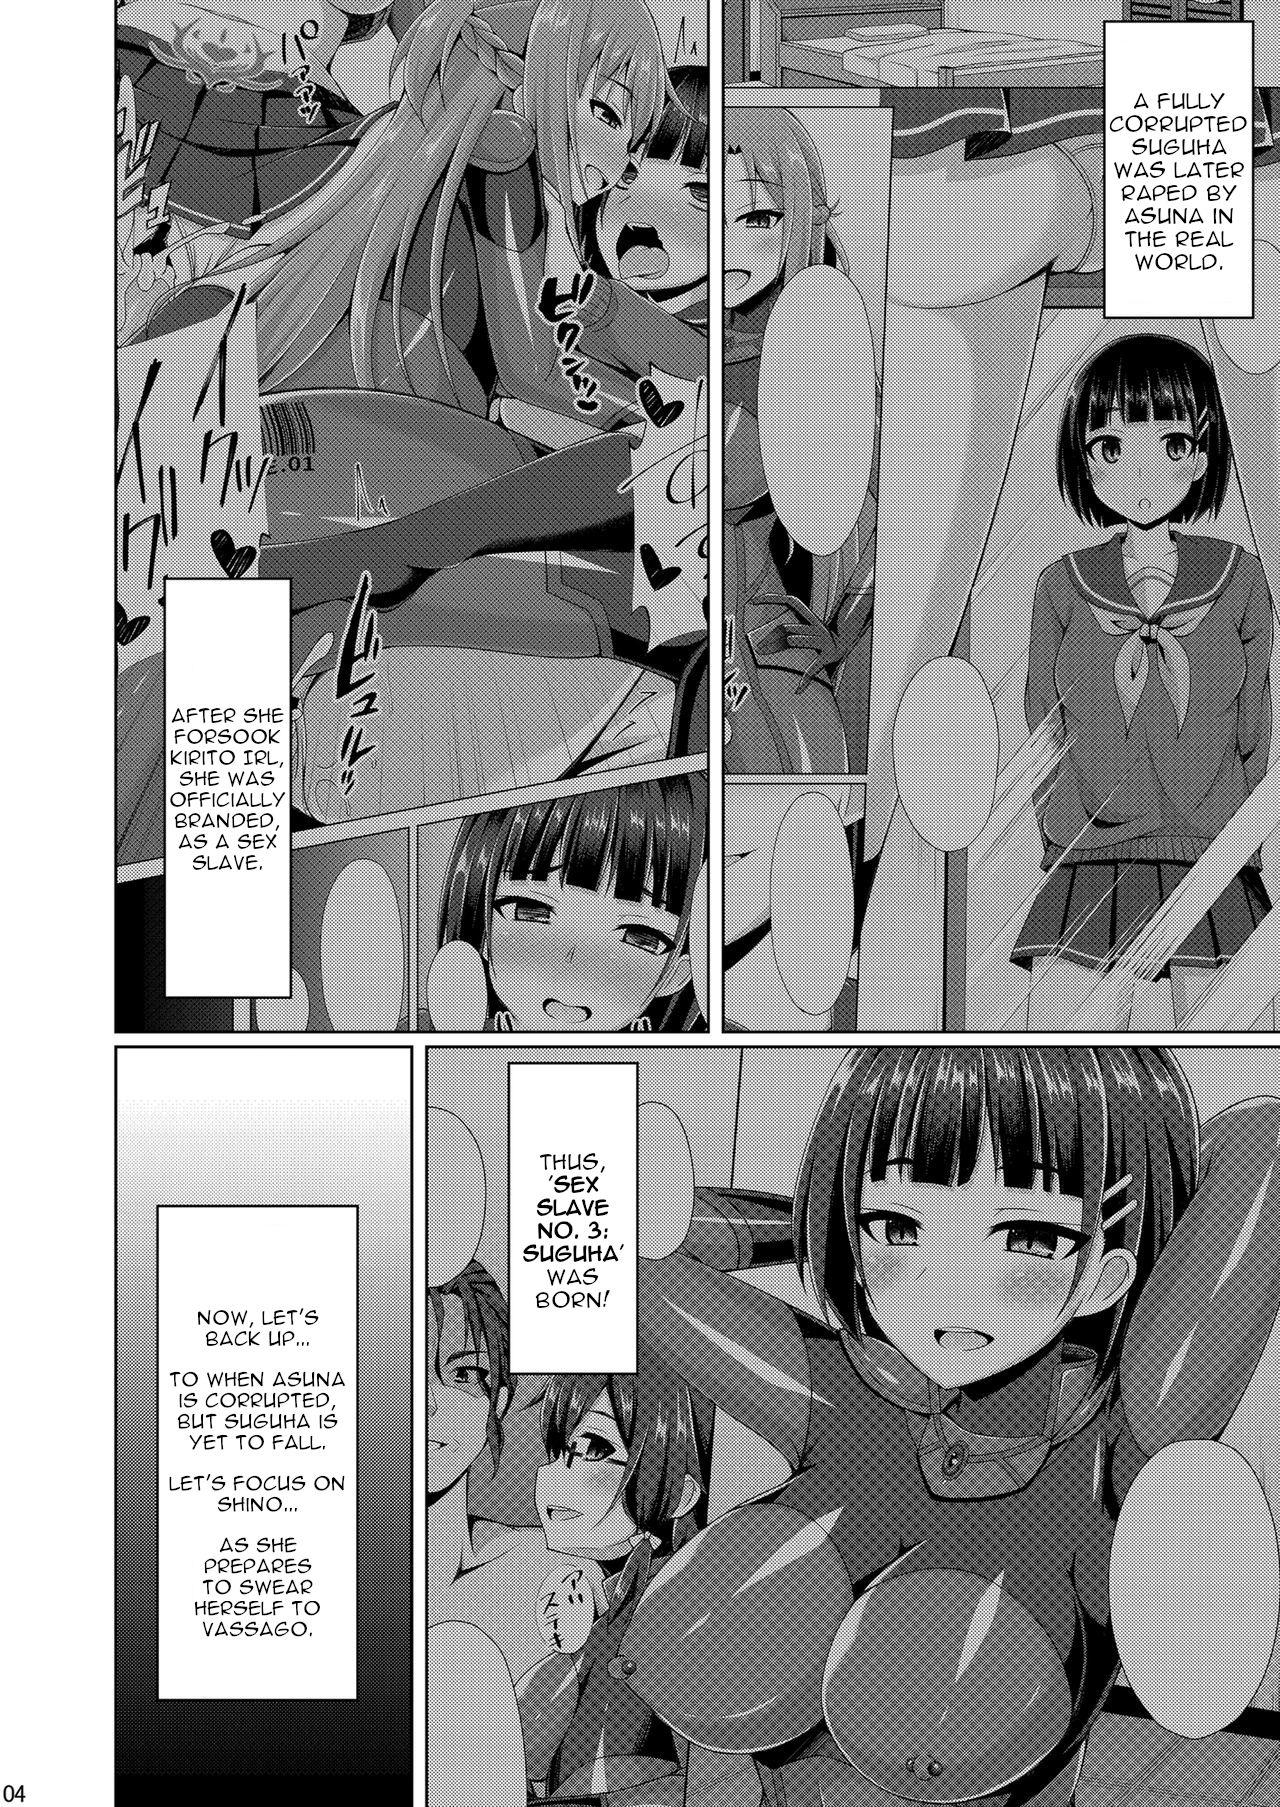 Pussylick Cool na Kanojo wa Mou Ore ni wa Hohoende kurenai... | The Cool Girl Doesnt Smile At Me Anymore... - Sword art online Yanks Featured - Page 3